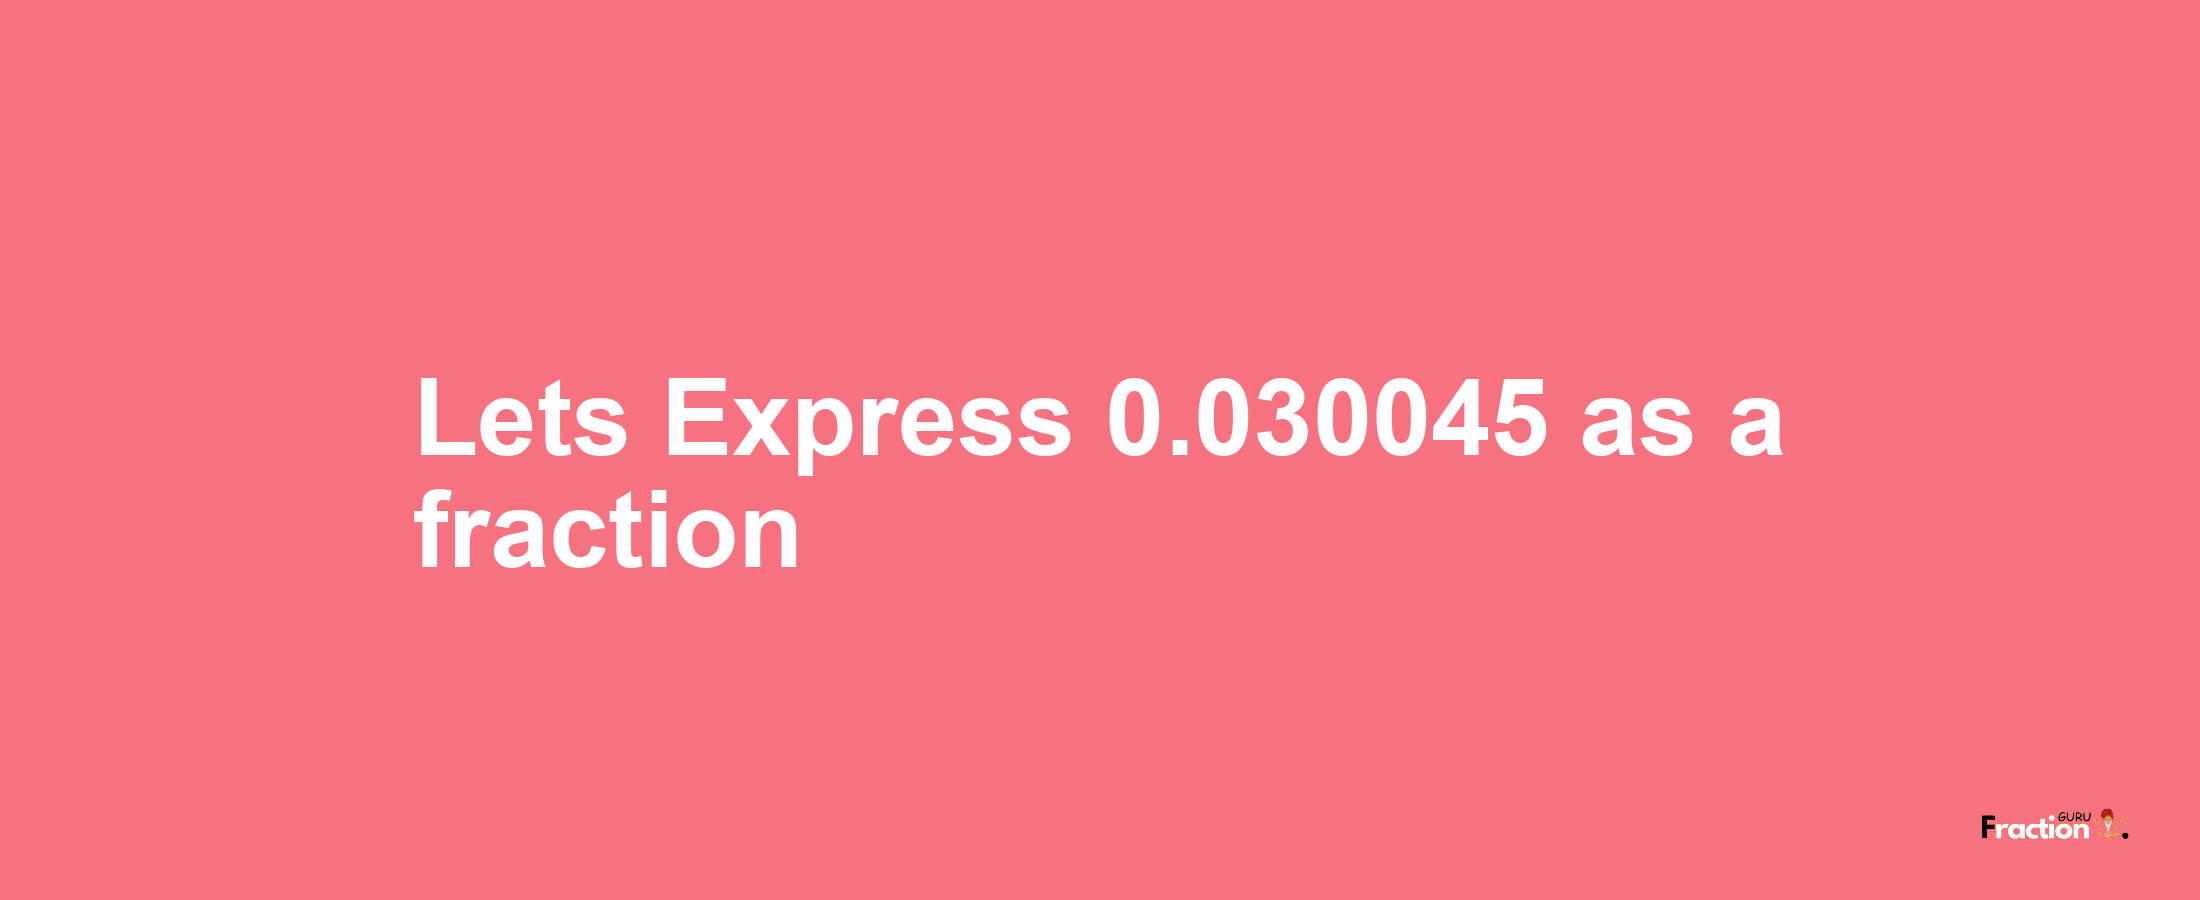 Lets Express 0.030045 as afraction